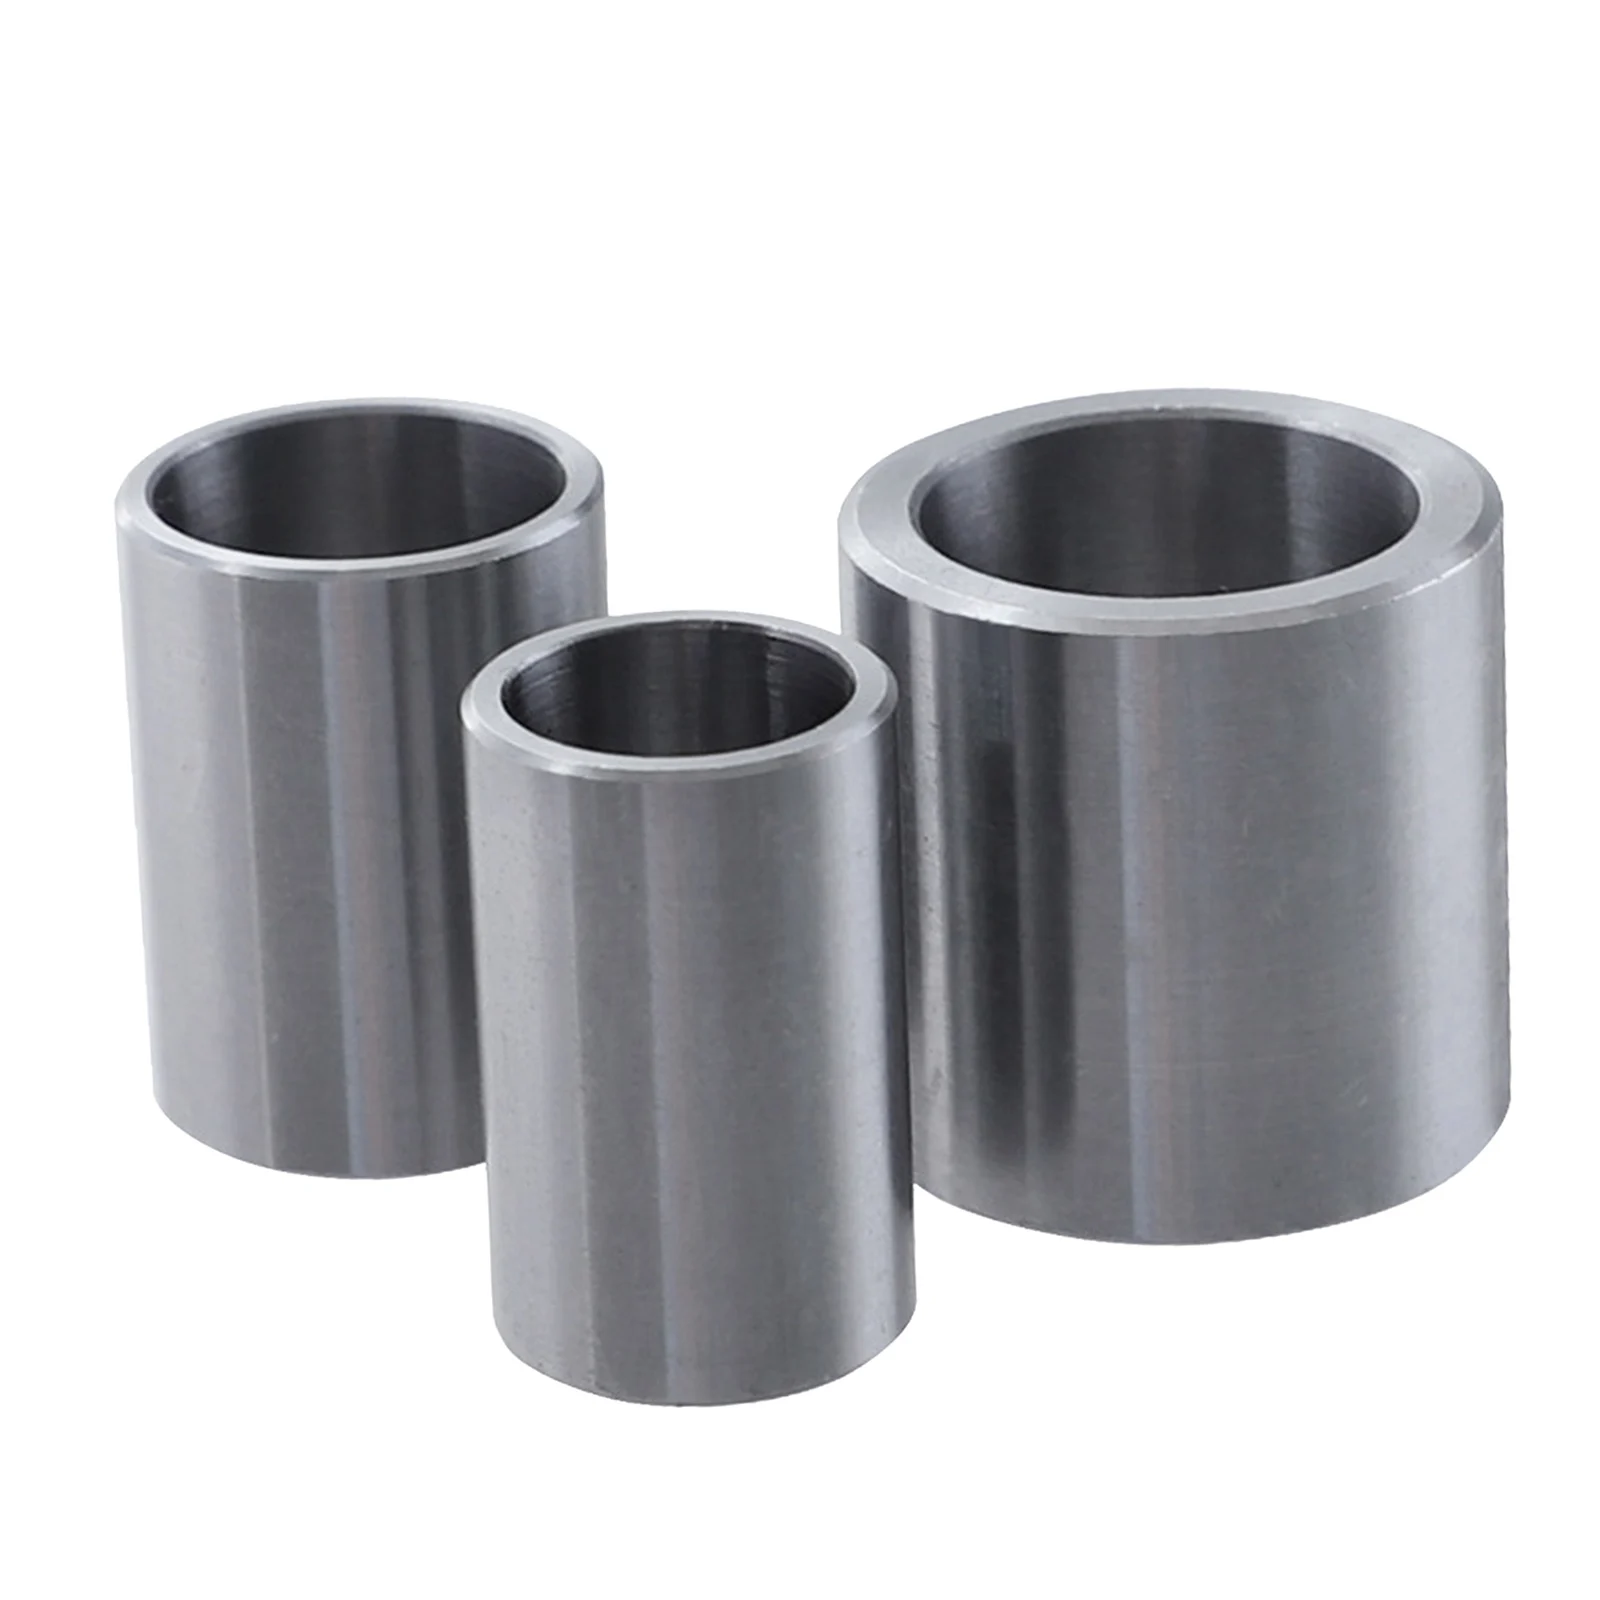 3 Sizes Reducing Bushing Adapters Reduced Diameter Hole for Bench Grinding Wheels Stainless Steel Rust-prevention Silver